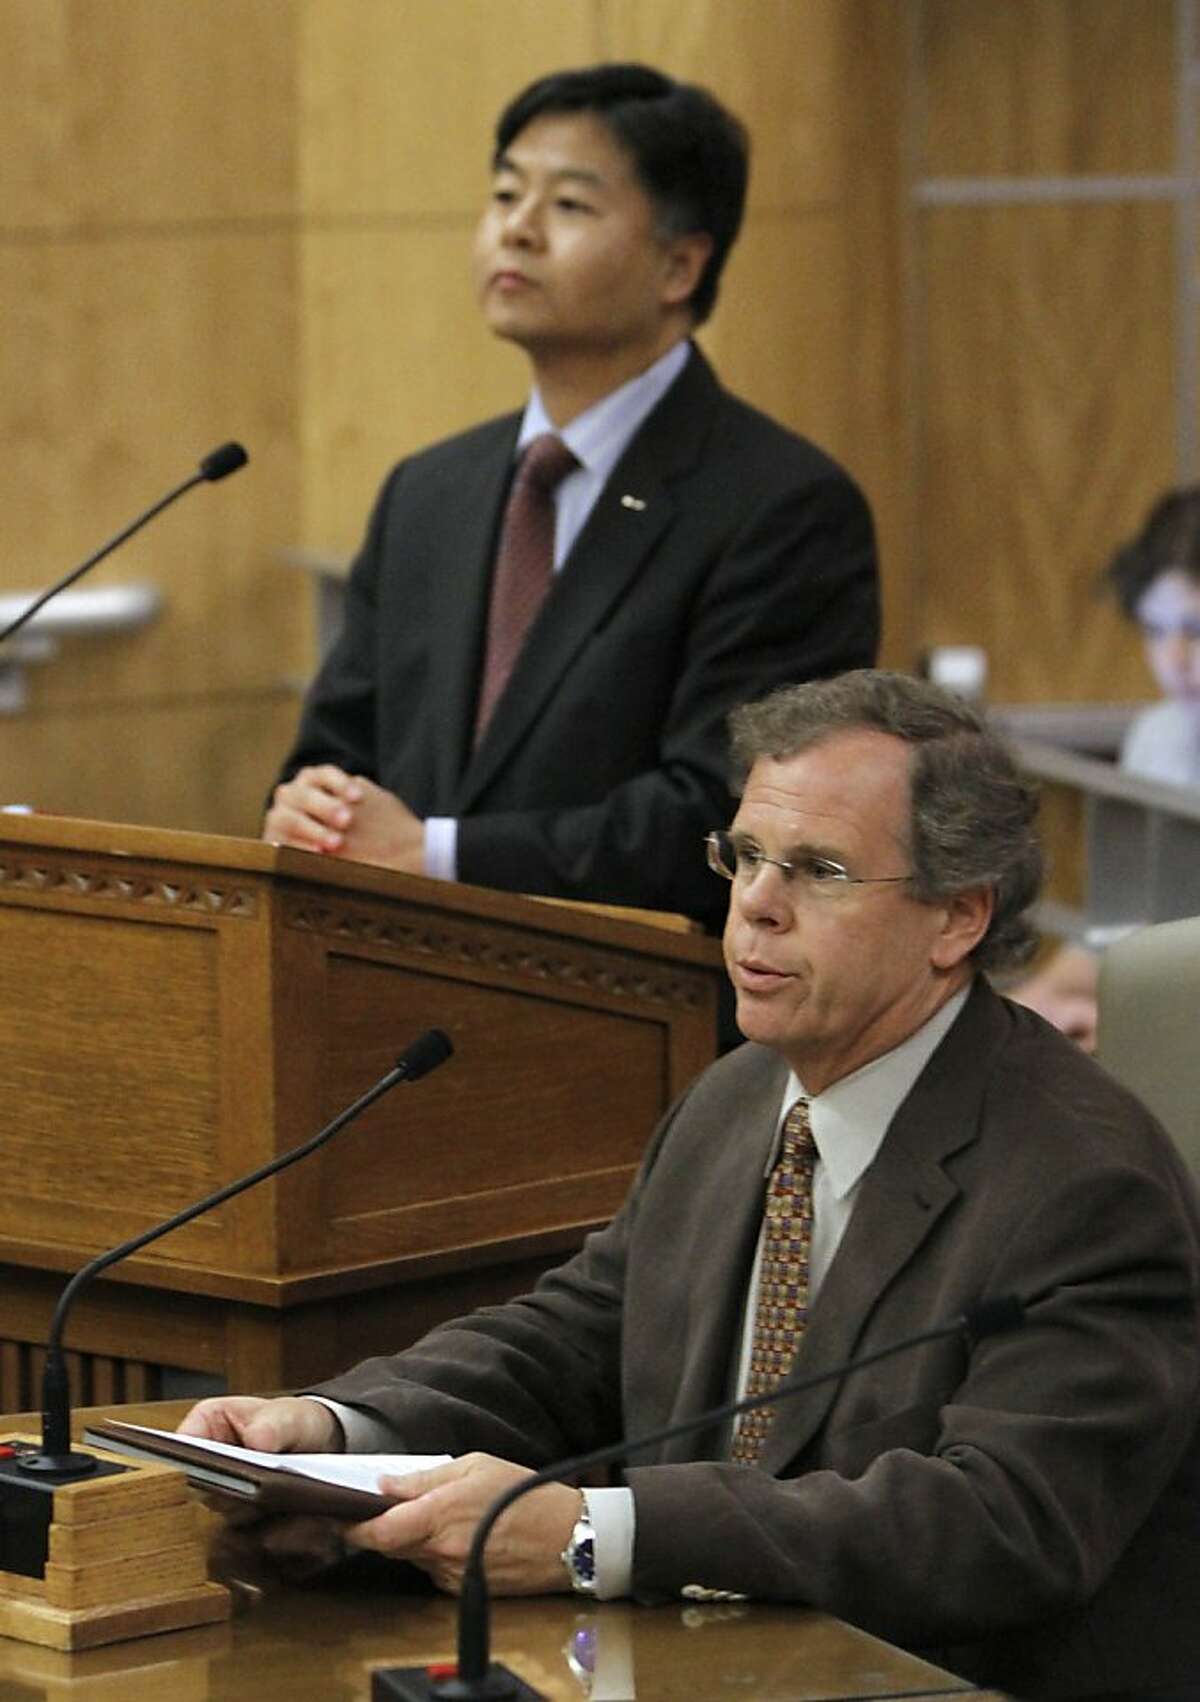 Attorney Peter Drake, executive director of the Coming Out Into Light Foundation, right, speaks about his negative experiences while receiving a controversial form of psychotherapy aimed at making gay people straight, while testifying in favor of a bill to ban the therapy during a hearing at the Capitol in Sacramento, Calif., Tuesday, May 8, 2012. The bill, SB1172, by state Sen.Ted Lieu, D-Torrence, left, would prohibit so-called reparative therapy for minors and obligate adults to sign a release form stating that the counseling is ineffective and possibly dangerous. It was passed by the Senate Judiciary Committee 3-1. (AP Photo/Rich Pedroncelli)